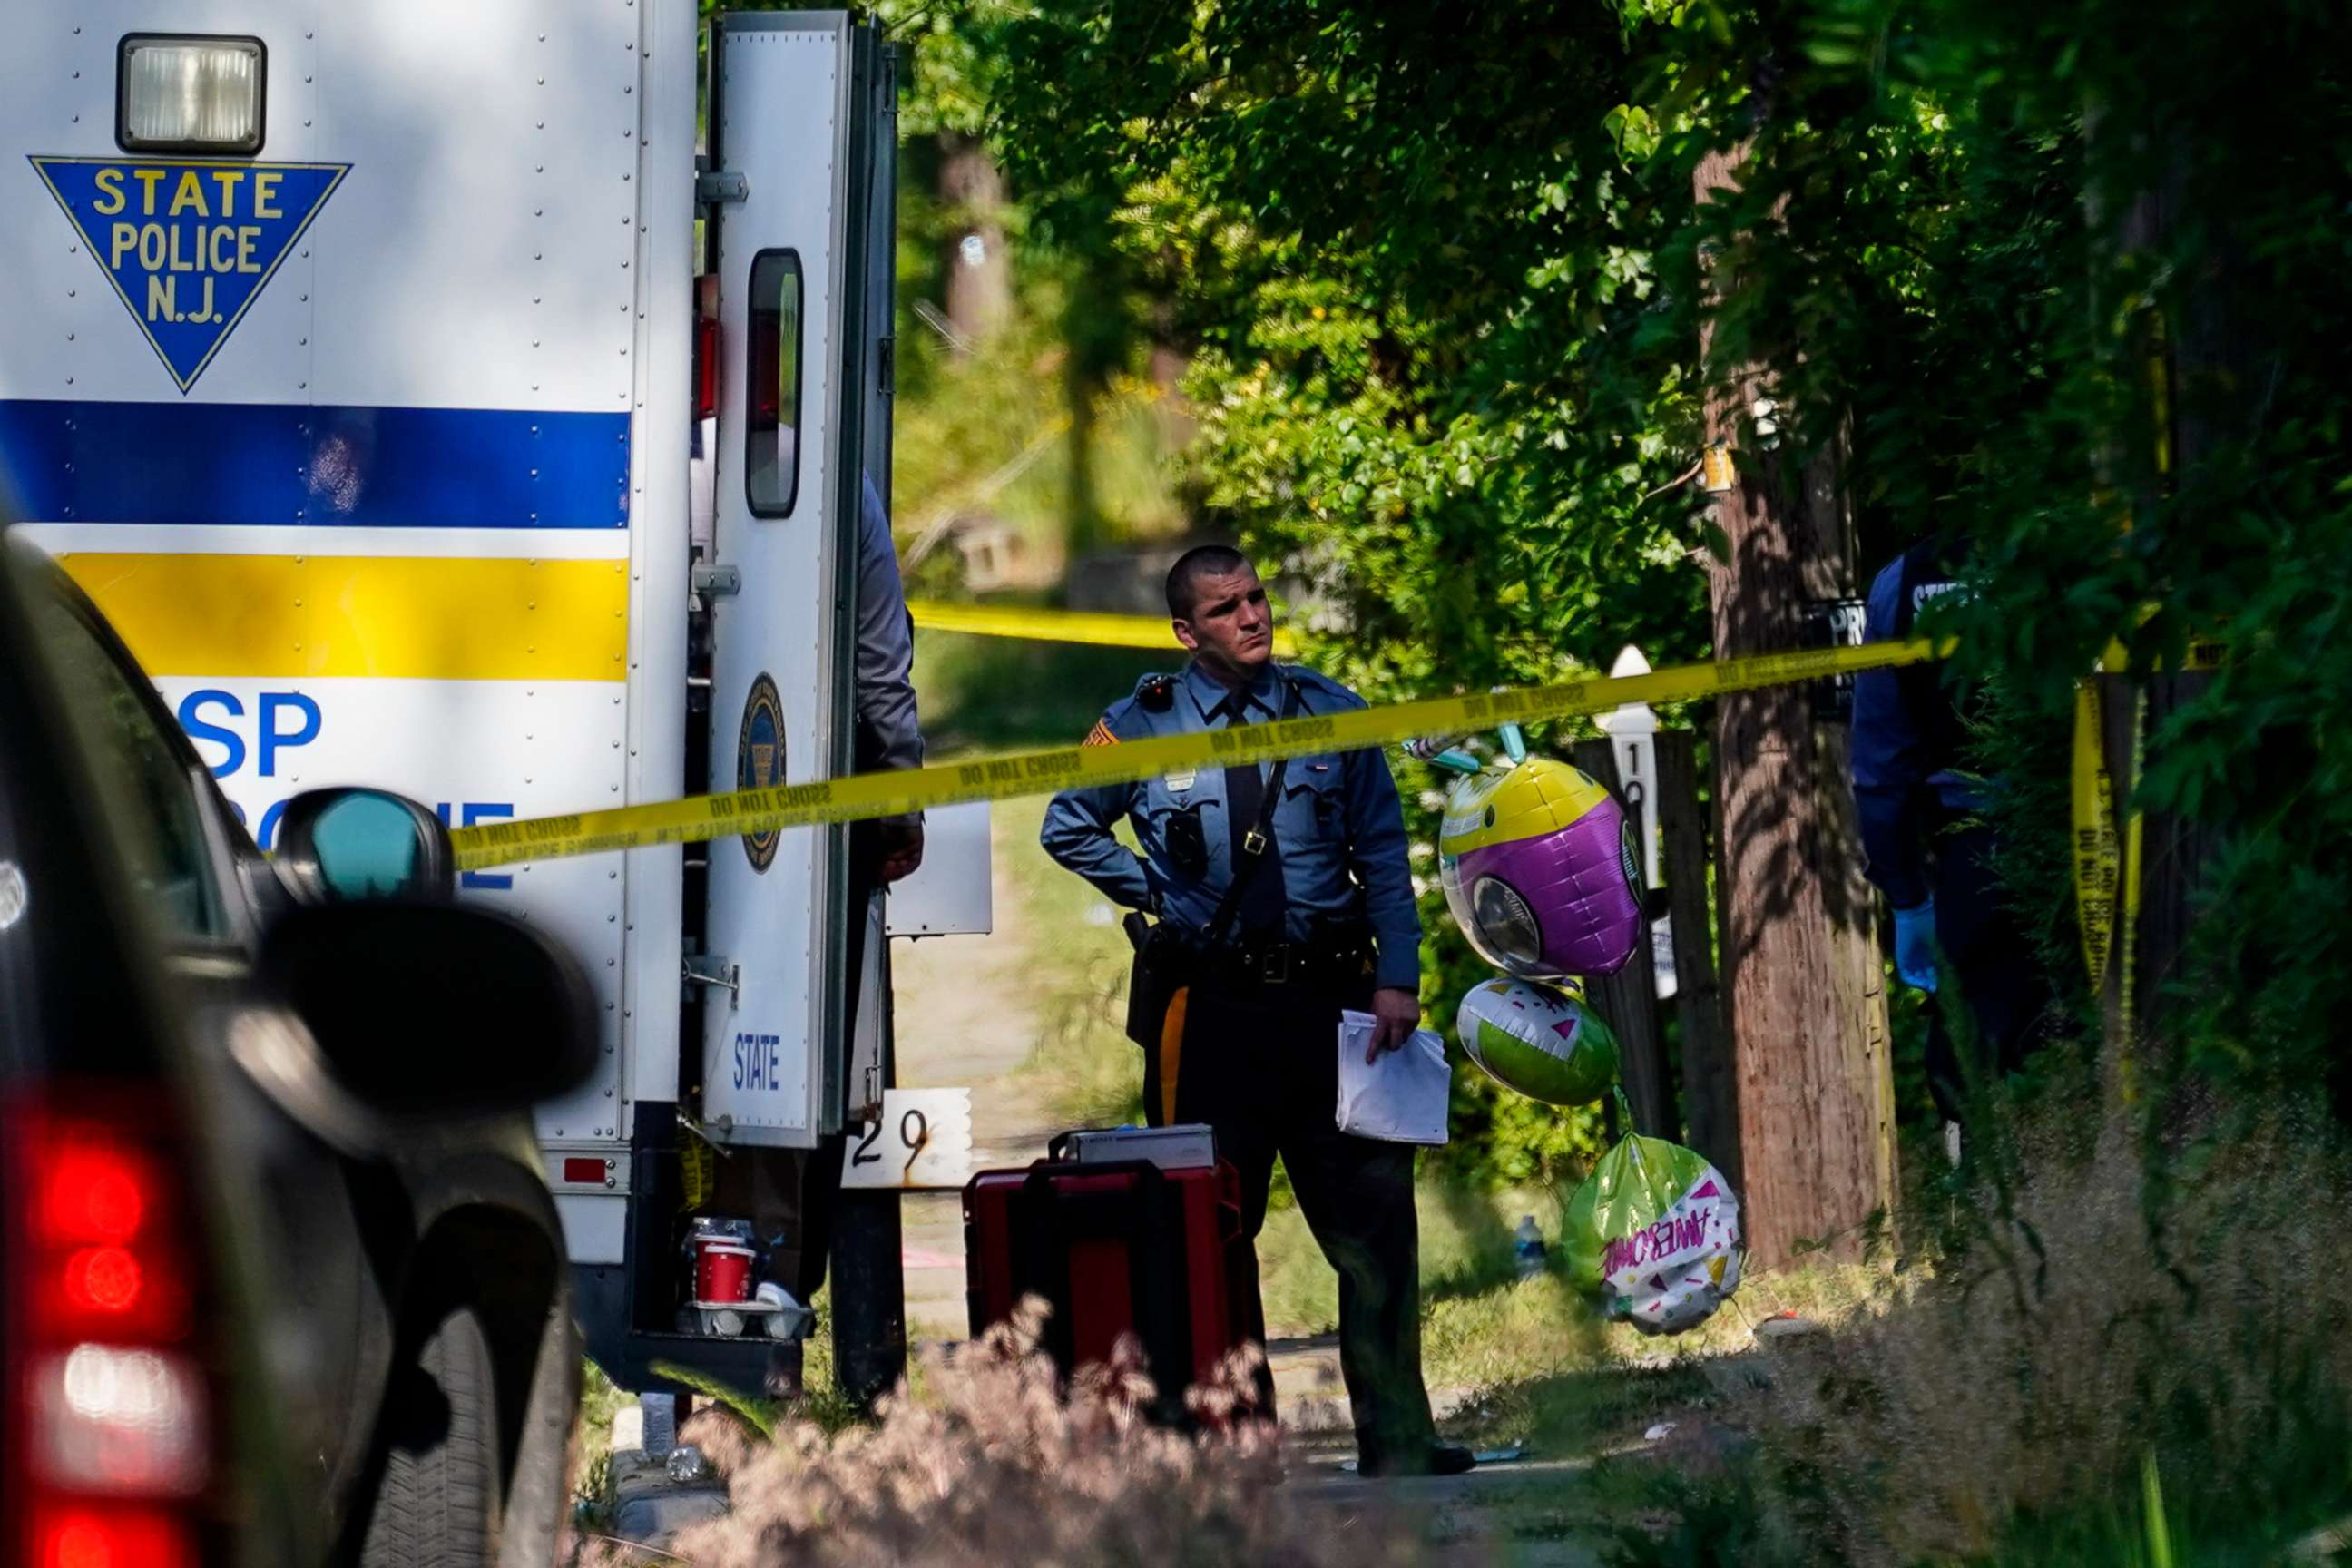 PHOTO: Police gather at the scene of a shooting in Fairfield Township, N.J., May 23, 2021.